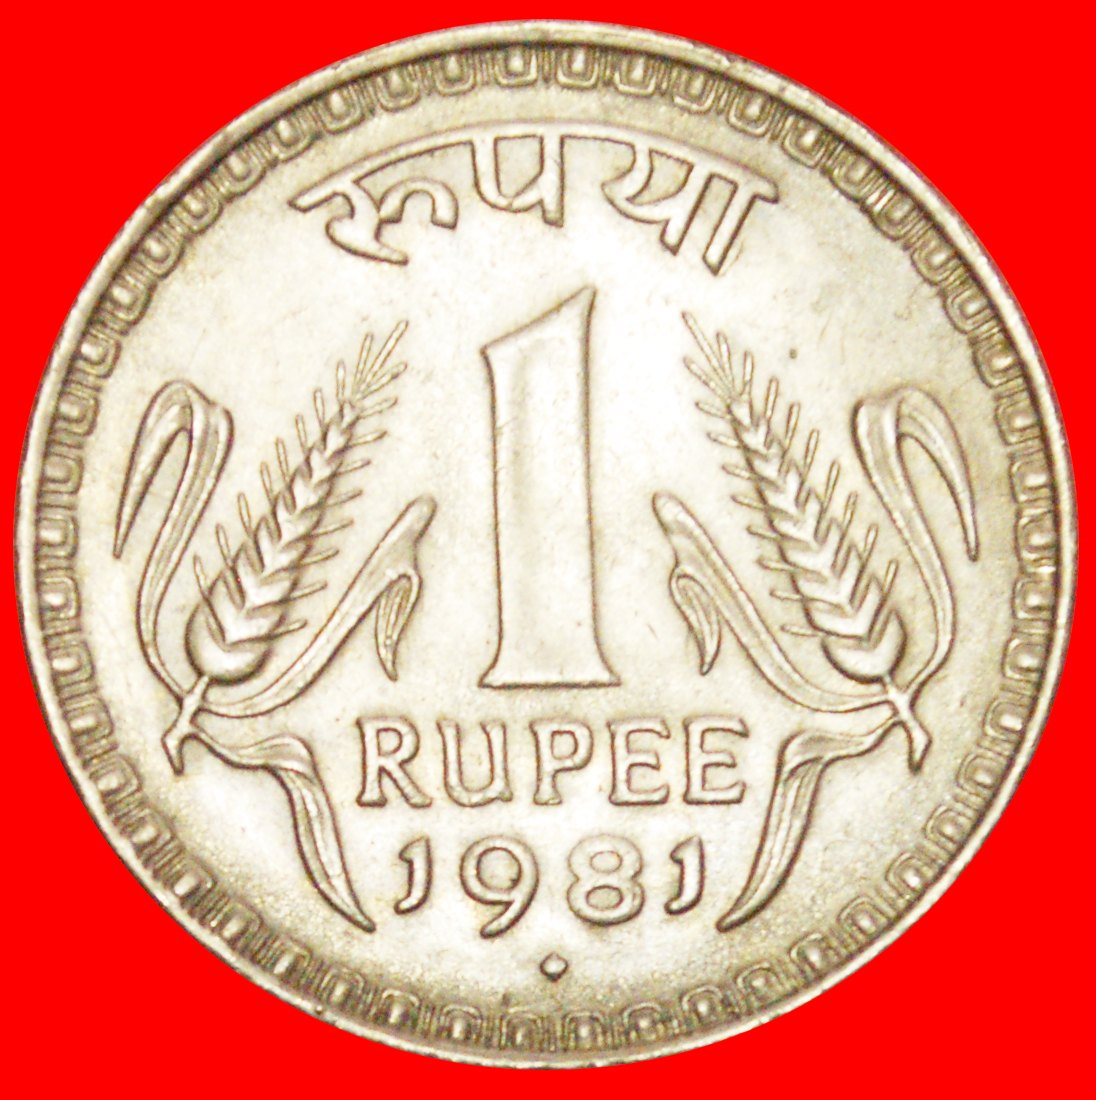  + LIONS (1975-1982): INDIA ★ 1 RUPEE 1981! LOW START ★ NO RESERVE!   